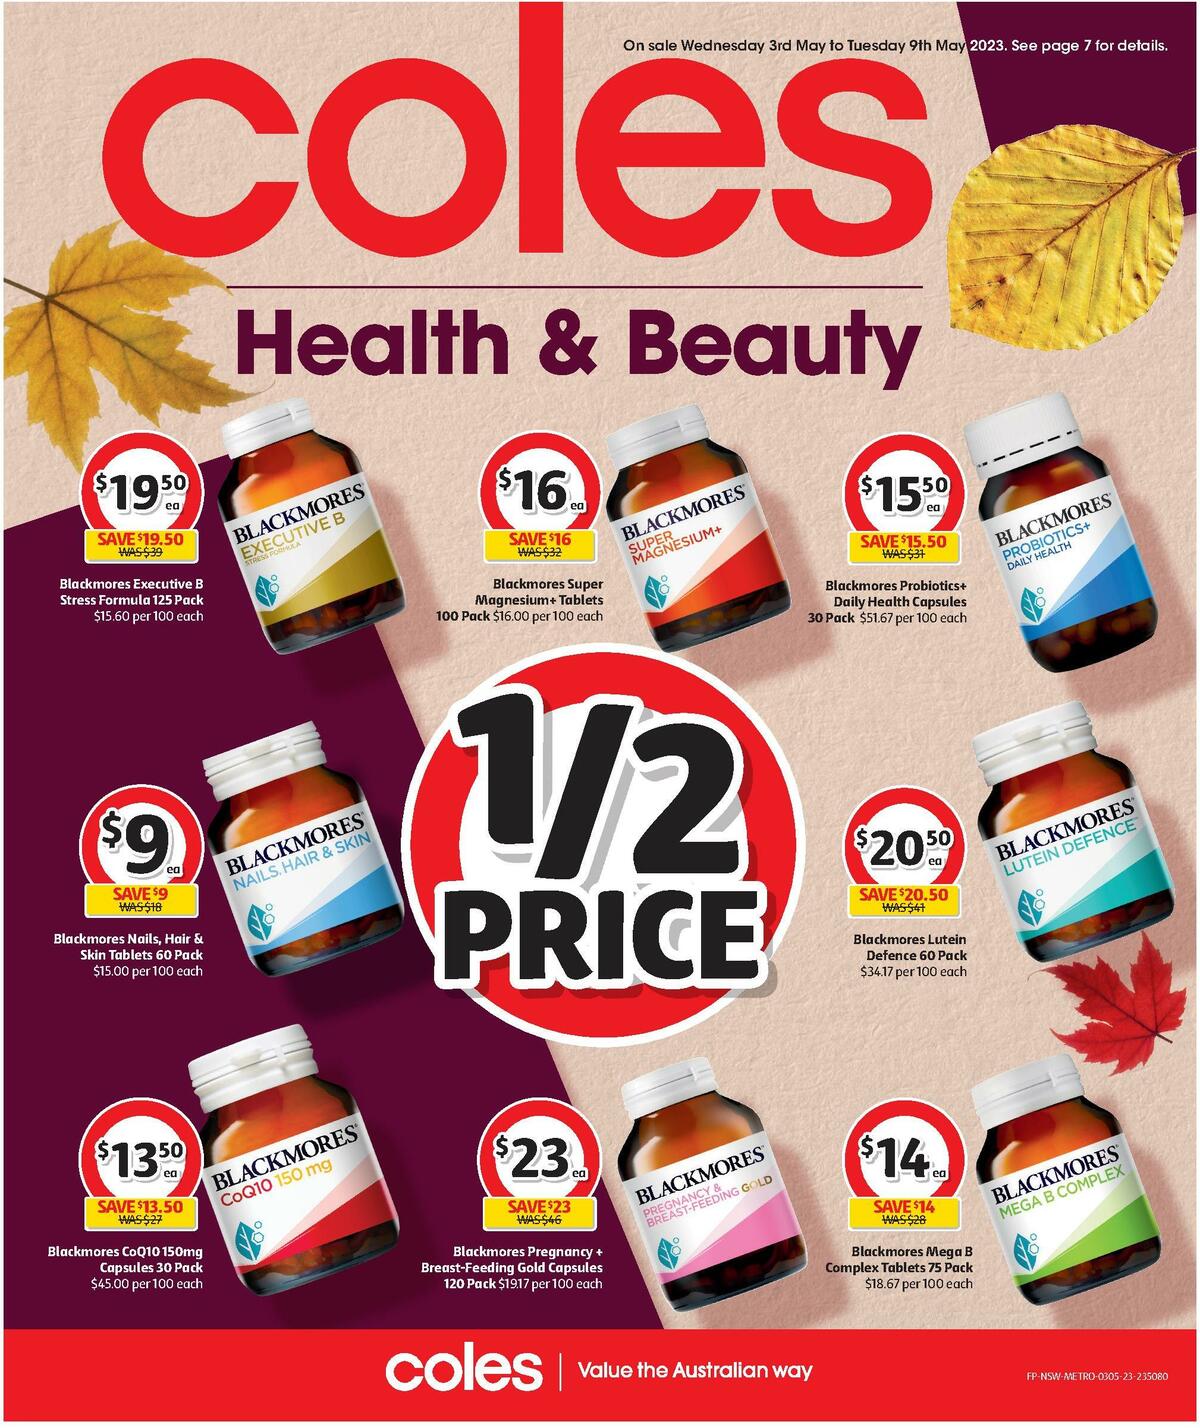 Coles Health & Beauty NSW METRO Catalogues from 3 May